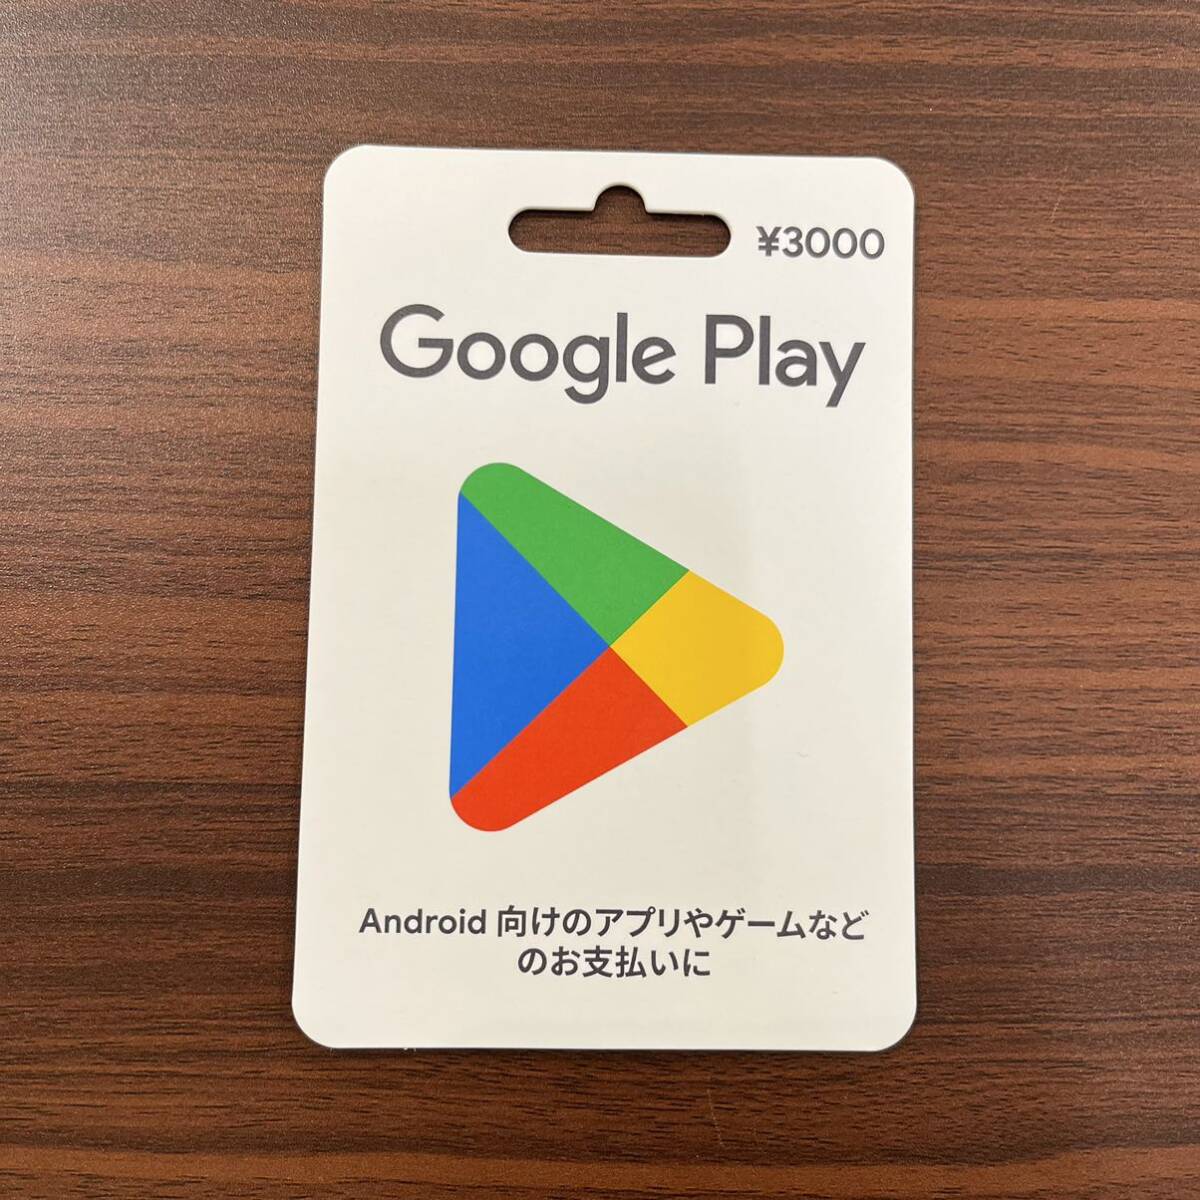 [TF0519]Google play card g-gru Play card 3000 jpy minute unused prepaid card number notification possibility shopping shopping 